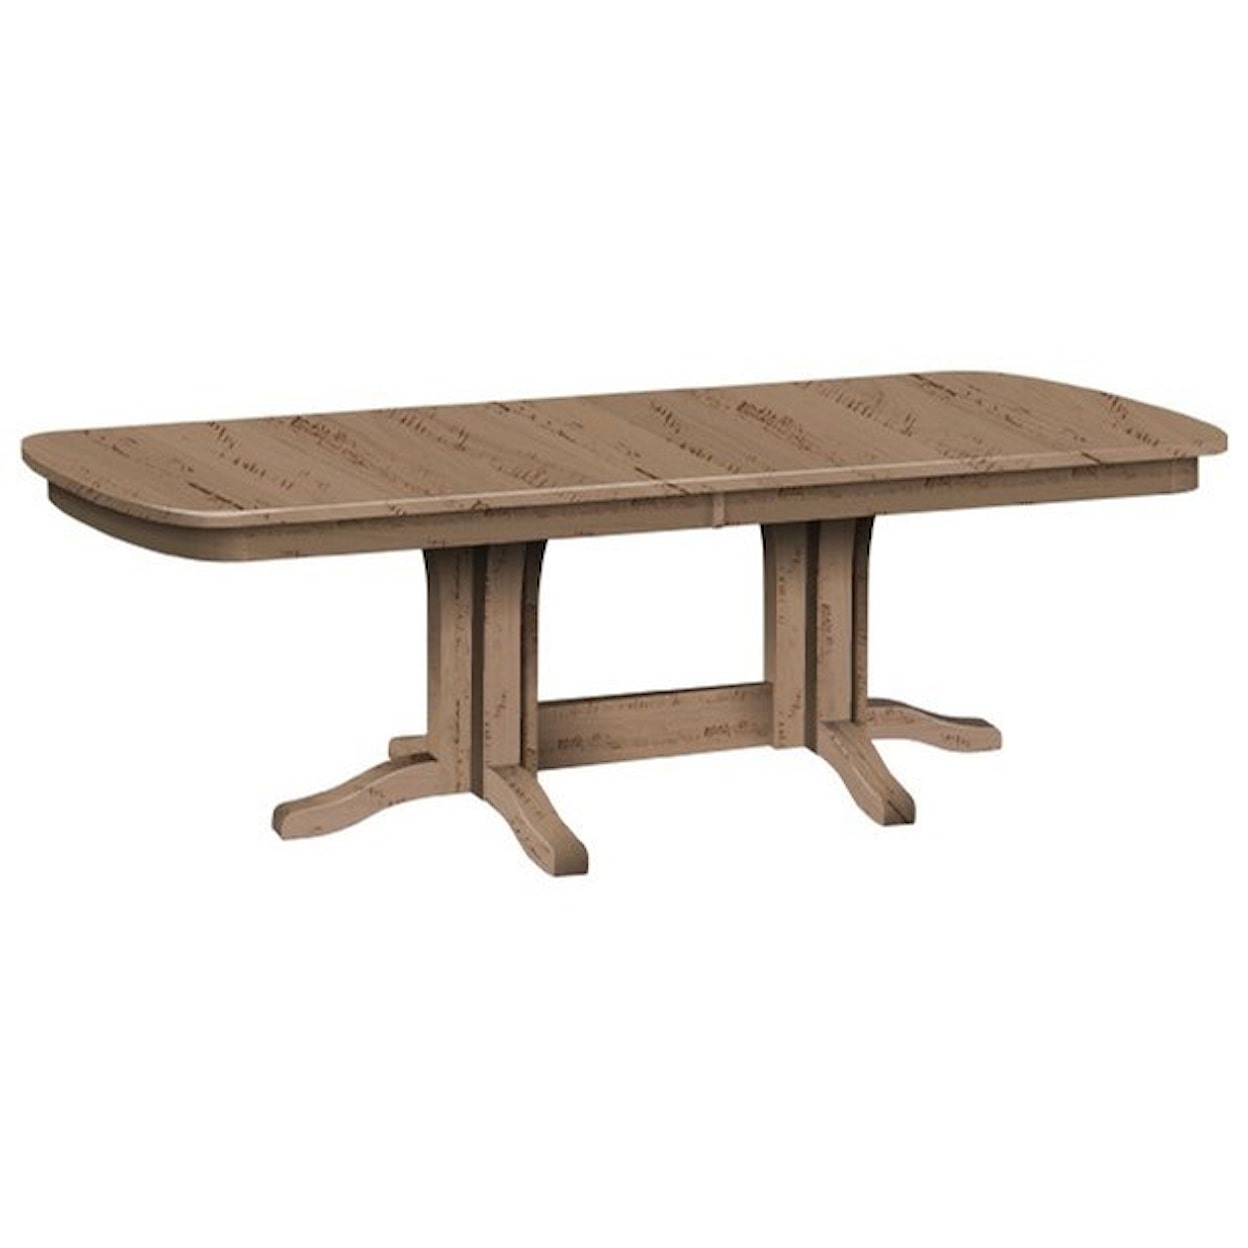 Daniel's Amish Millsdale Customizable Solid Wood Millsdale Table